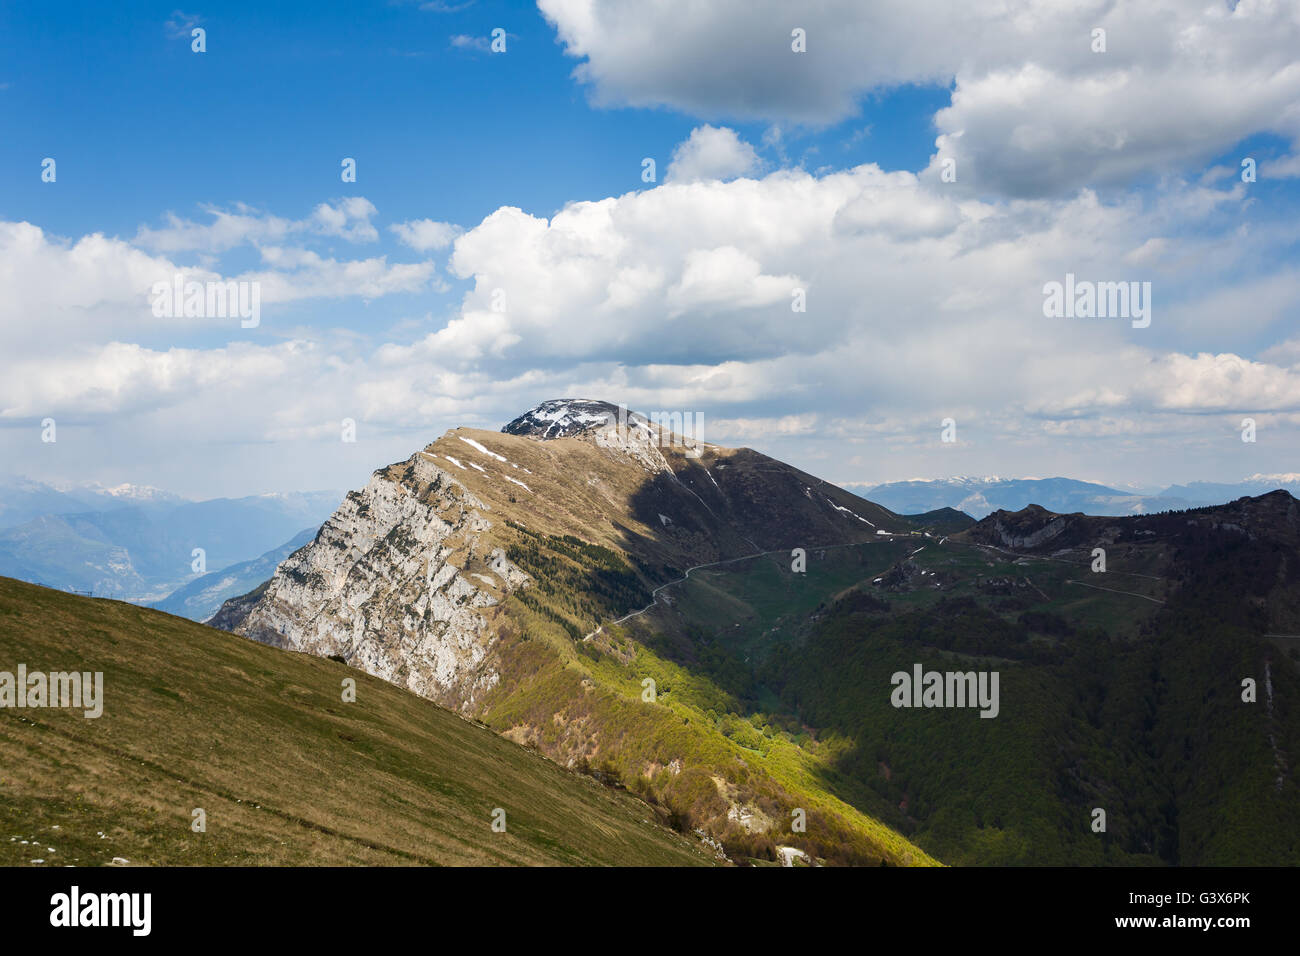 View of the Dolomite mountains, North Italy Stock Photo